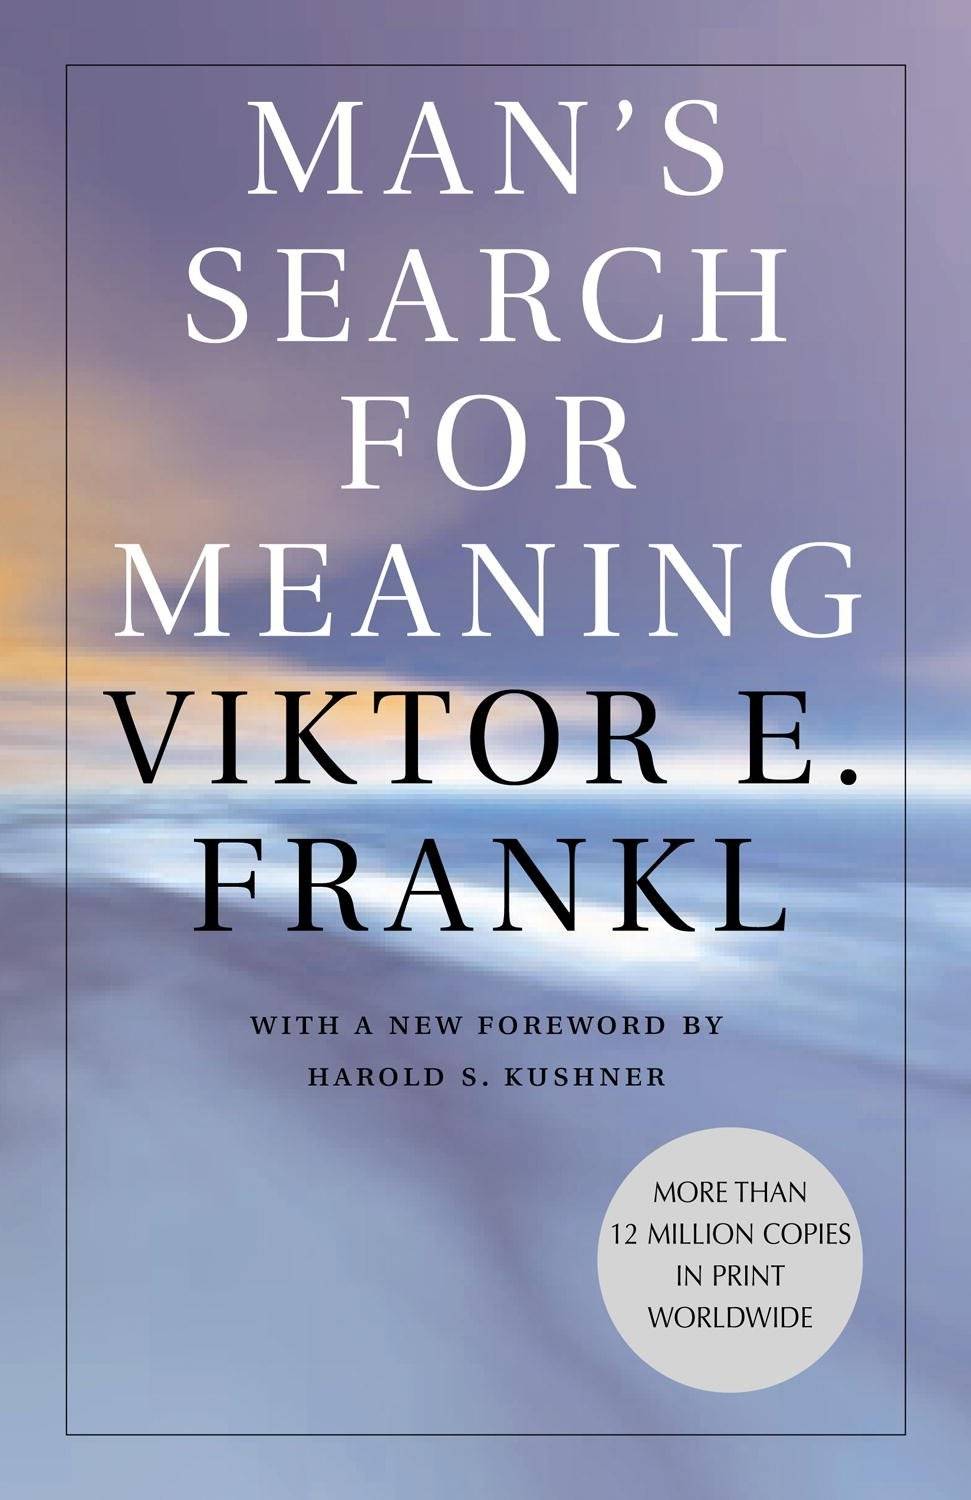 'Man's Search For Meaning' by Viktor Frankl | Business Insider India